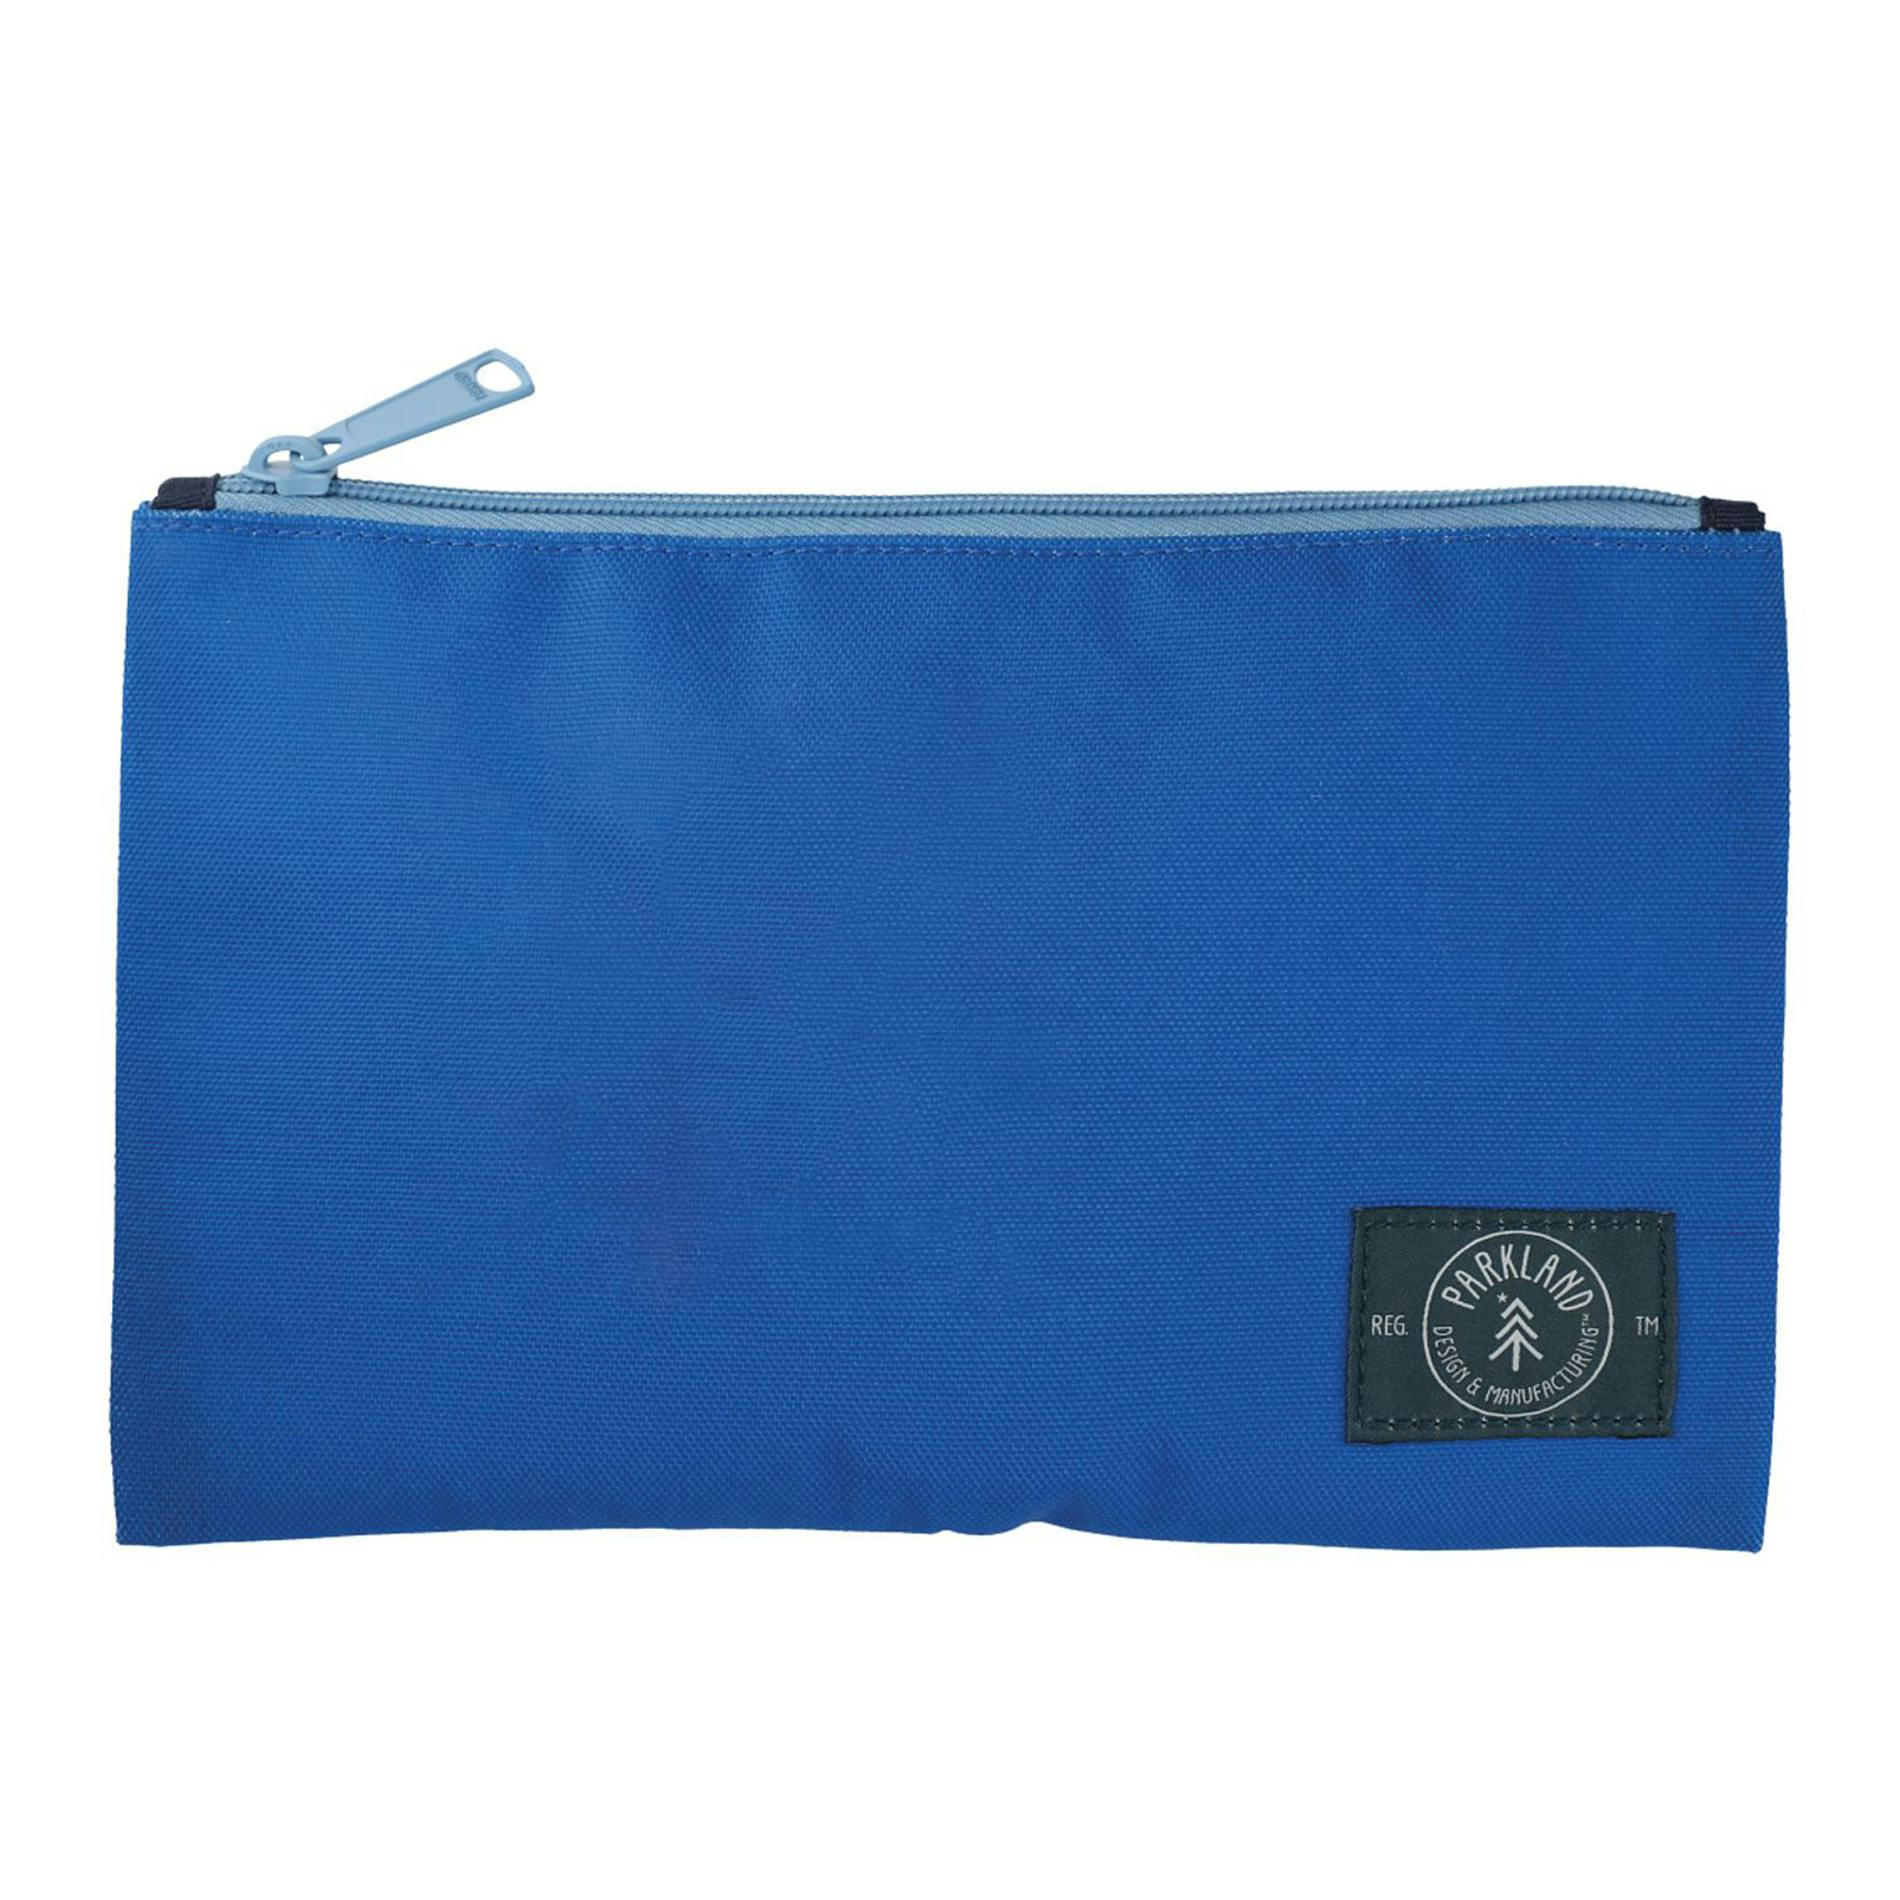 Parkland Fraction Travel Pouch - additional Image 1